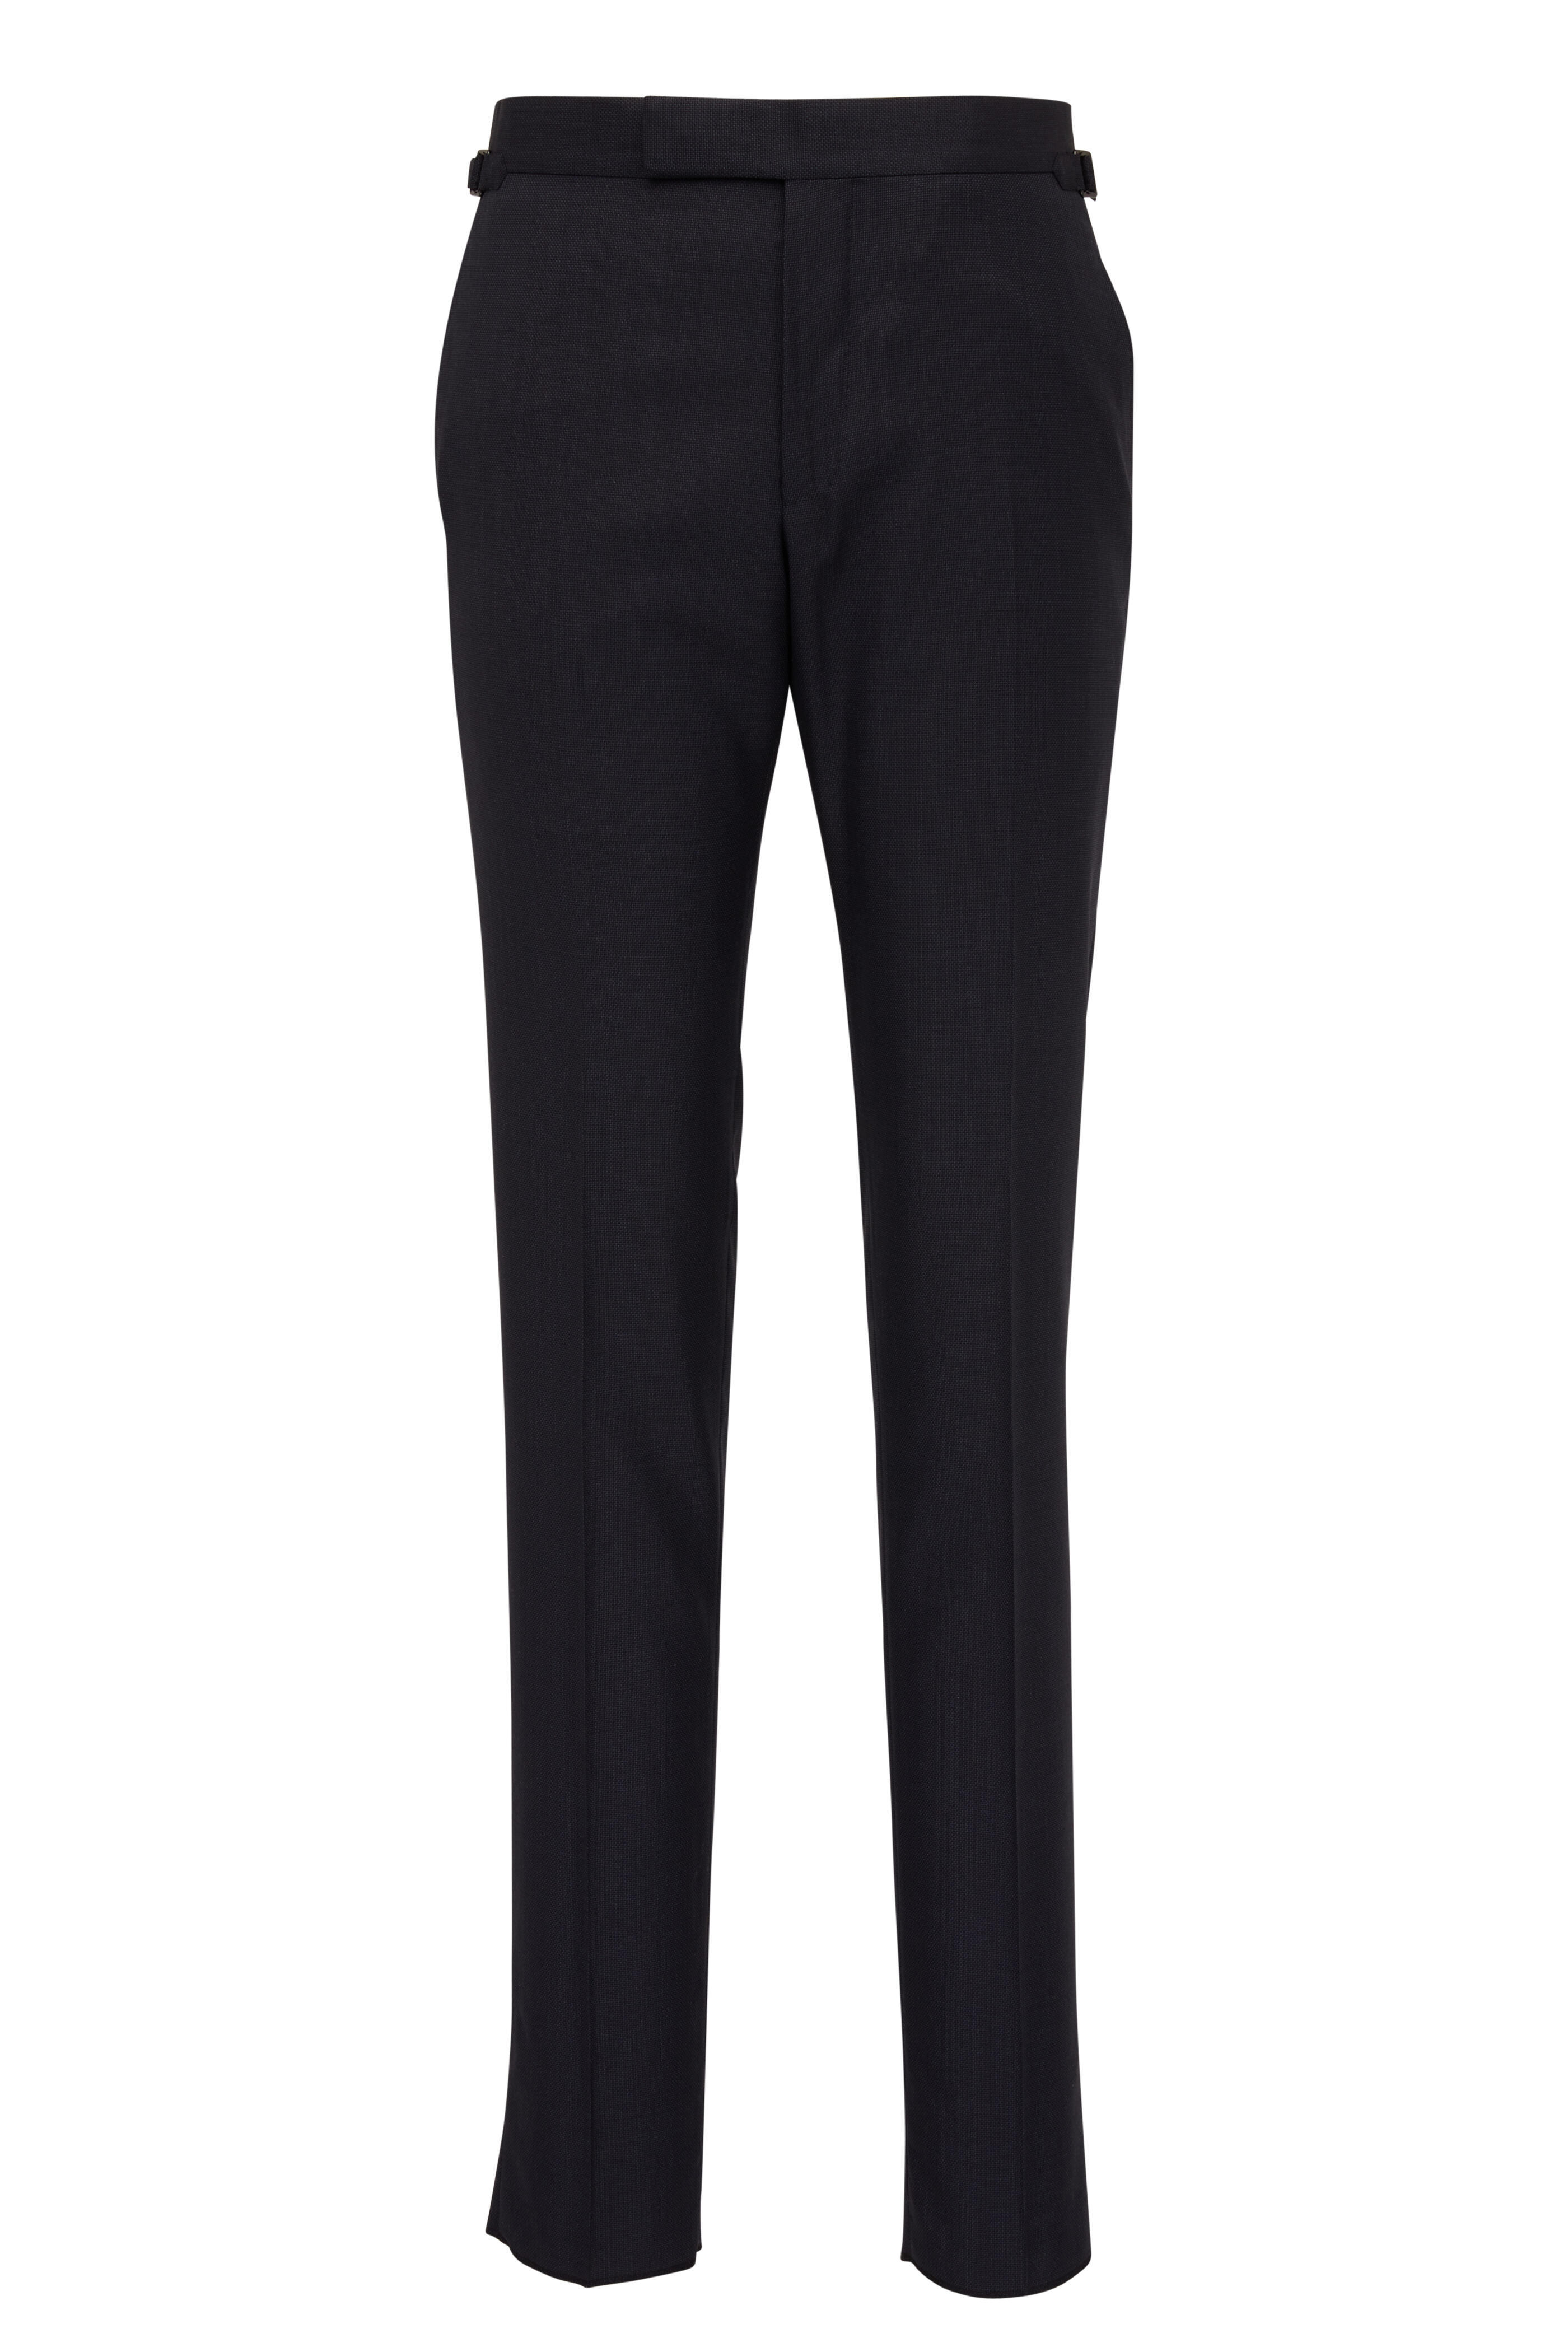 Lagring Bluebell Admin Tom Ford - O'Connor Charcoal Gray Micro Mouline Suit